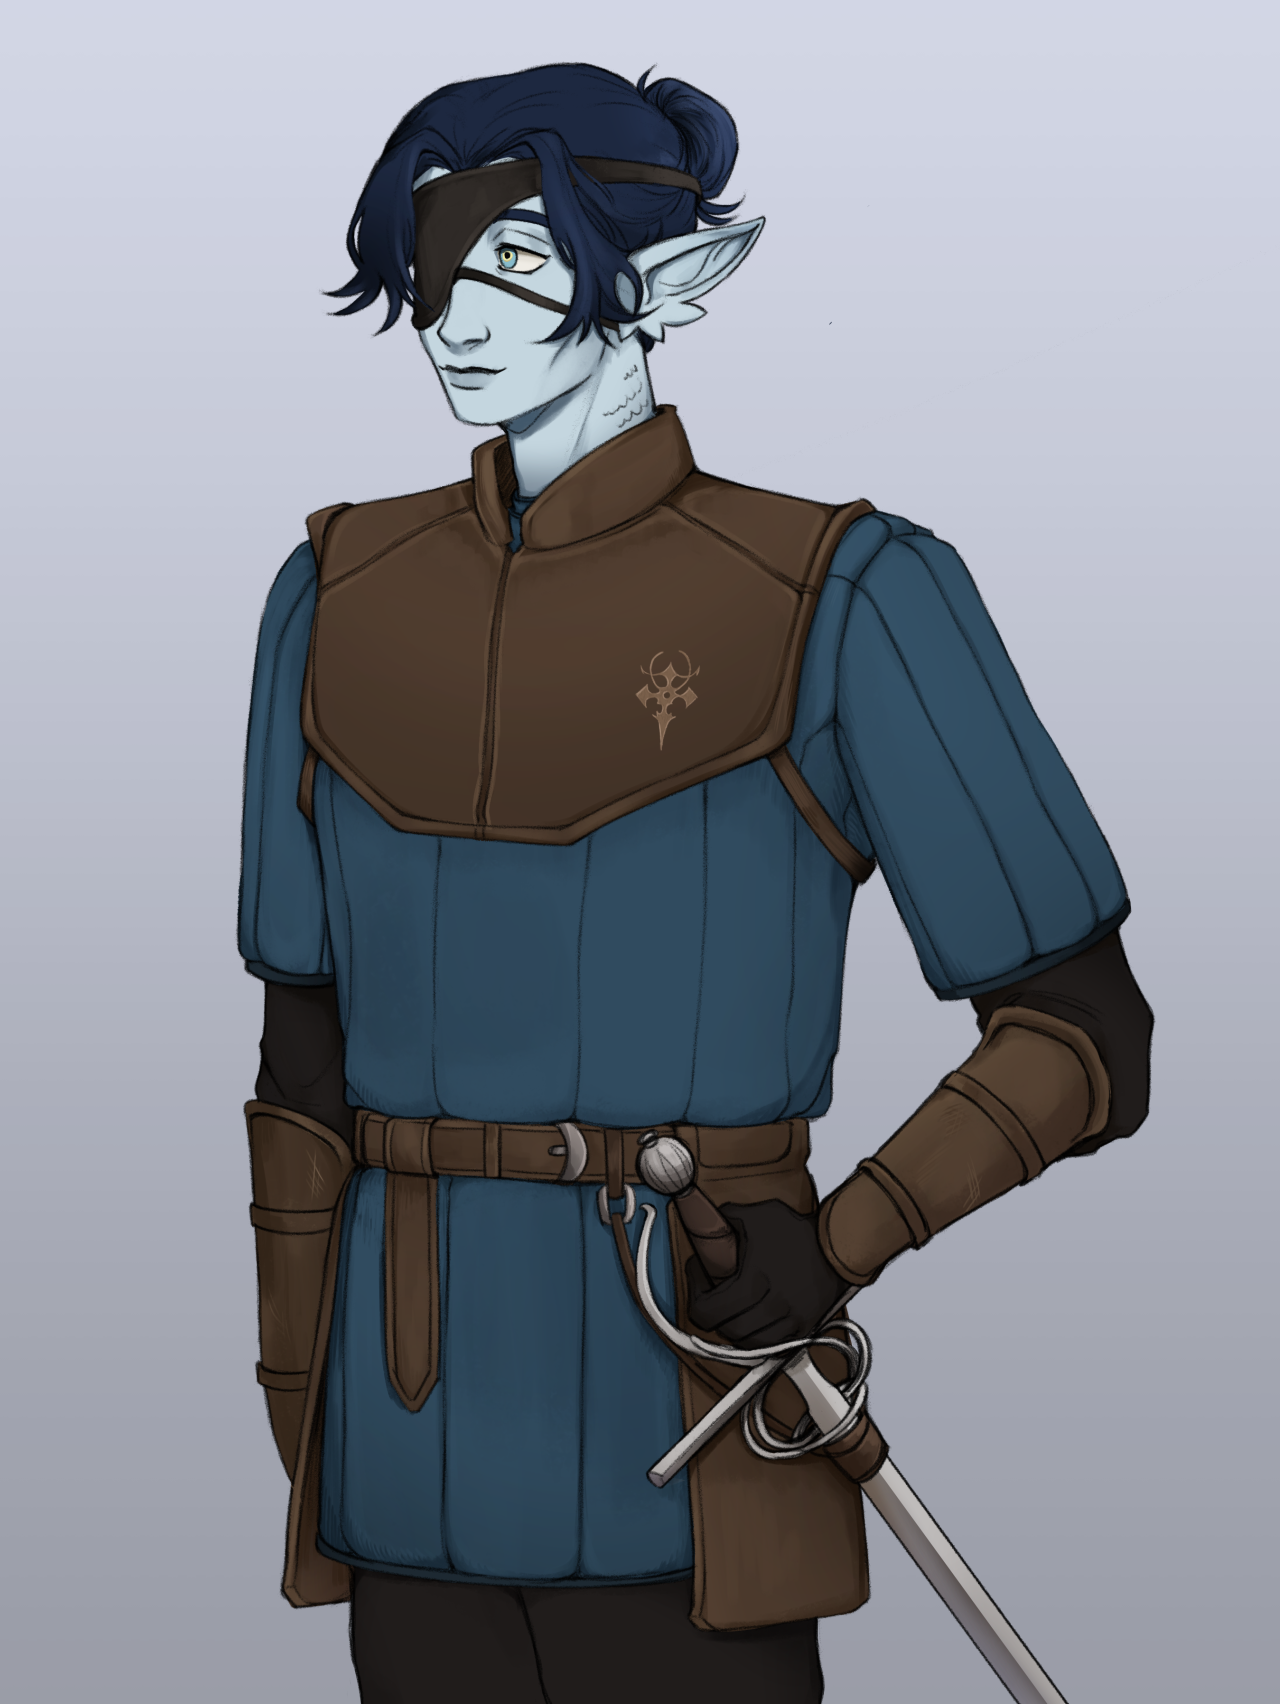 This is a digital illustration with colours. On a grey background, a masc presenting character with pale blue skin holds his rapier to his side.  He has long and pointy elf ears, fish scales on his neck, and dark blue hair tied into a bun. He is smiling and seems relaxed.  He is dressed in a simple leather armour, with leather covering his arms, upper torso and lower backside and with a blue gambeson under it protecting his body. An eyepatch covers one of his eyes.